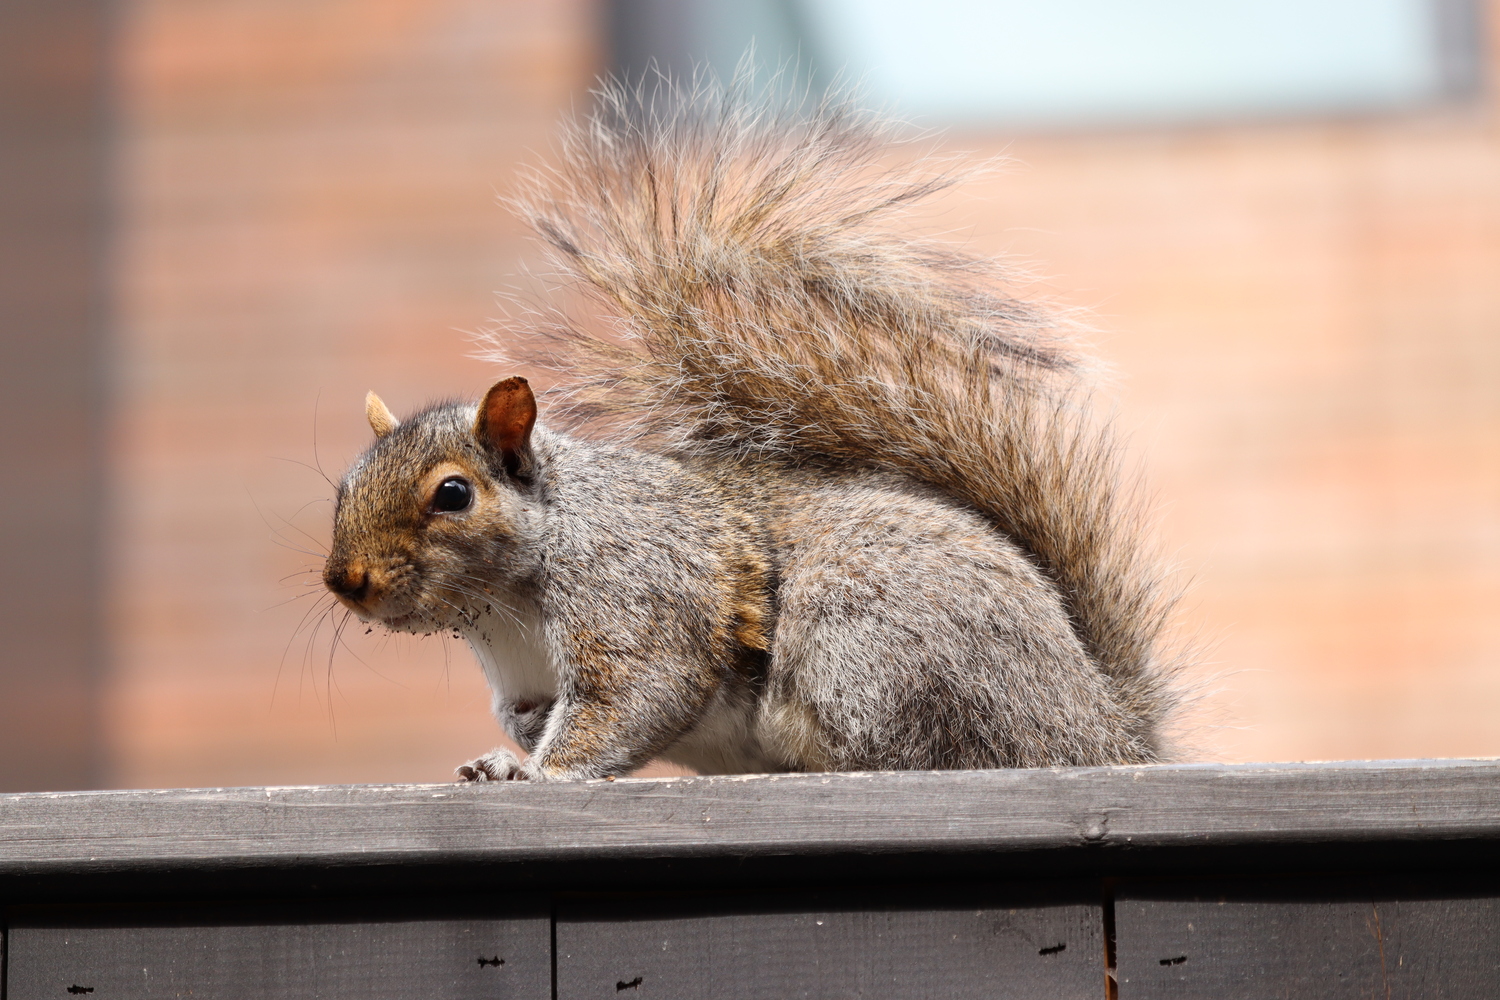 close up of a squirrel atop a dark wood fence.
its tail is curled on its back
and it's facing left but looking at the camera.
there are crumbs of dirt
around its mouth and whiskers.
you can see the little claws
of its front paw in the foreground,
while the other paw is curled to its chest.